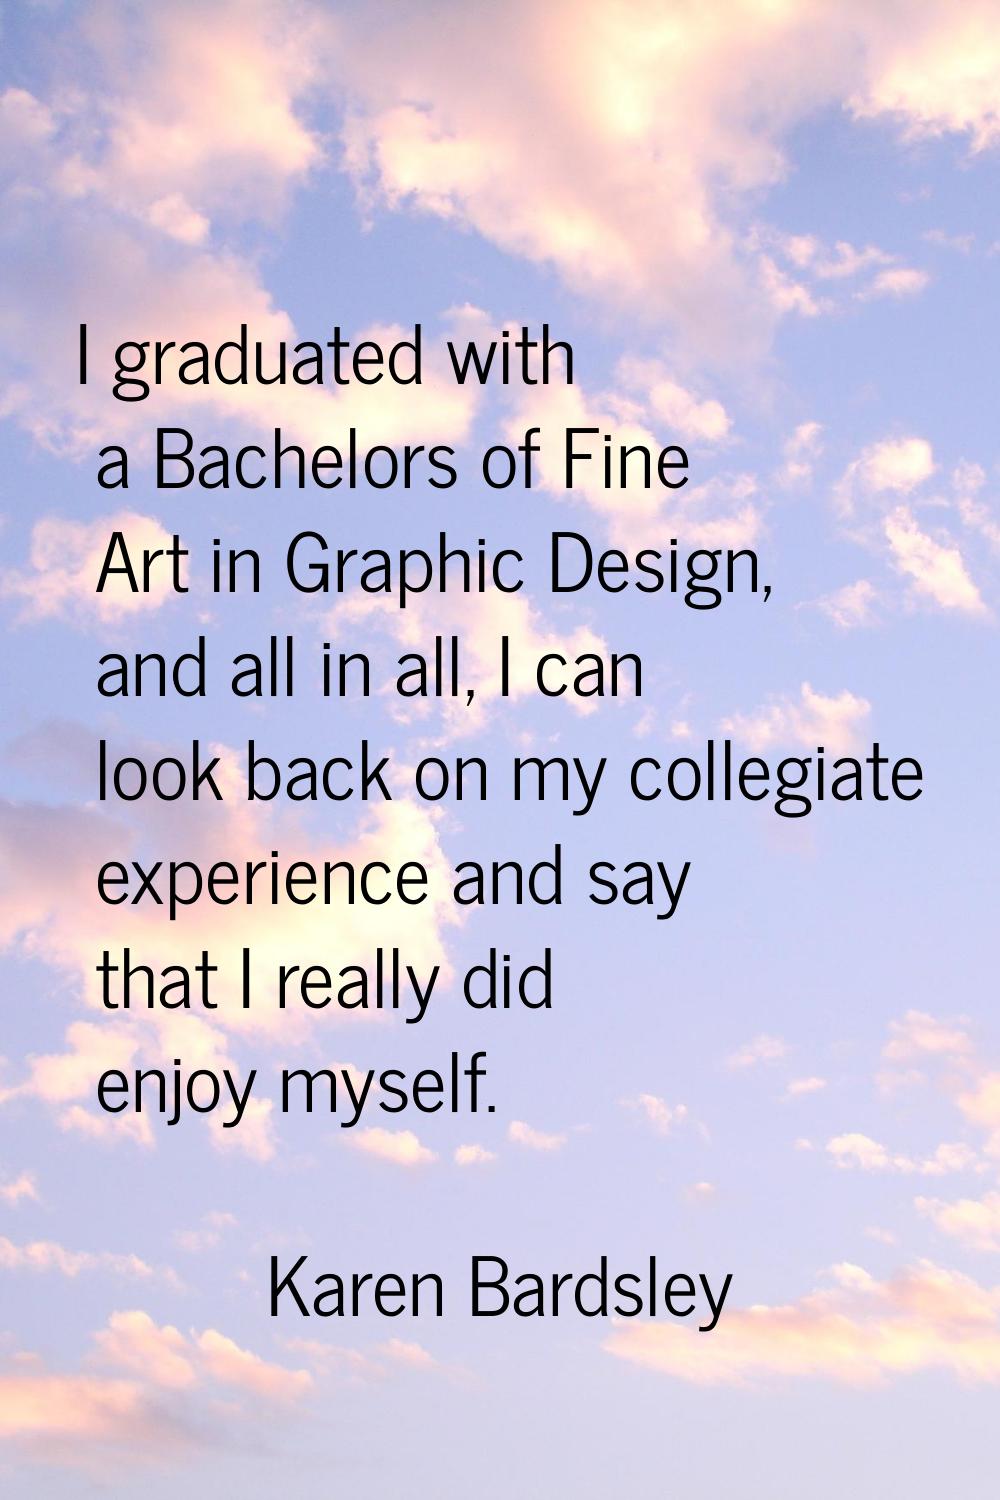 I graduated with a Bachelors of Fine Art in Graphic Design, and all in all, I can look back on my c